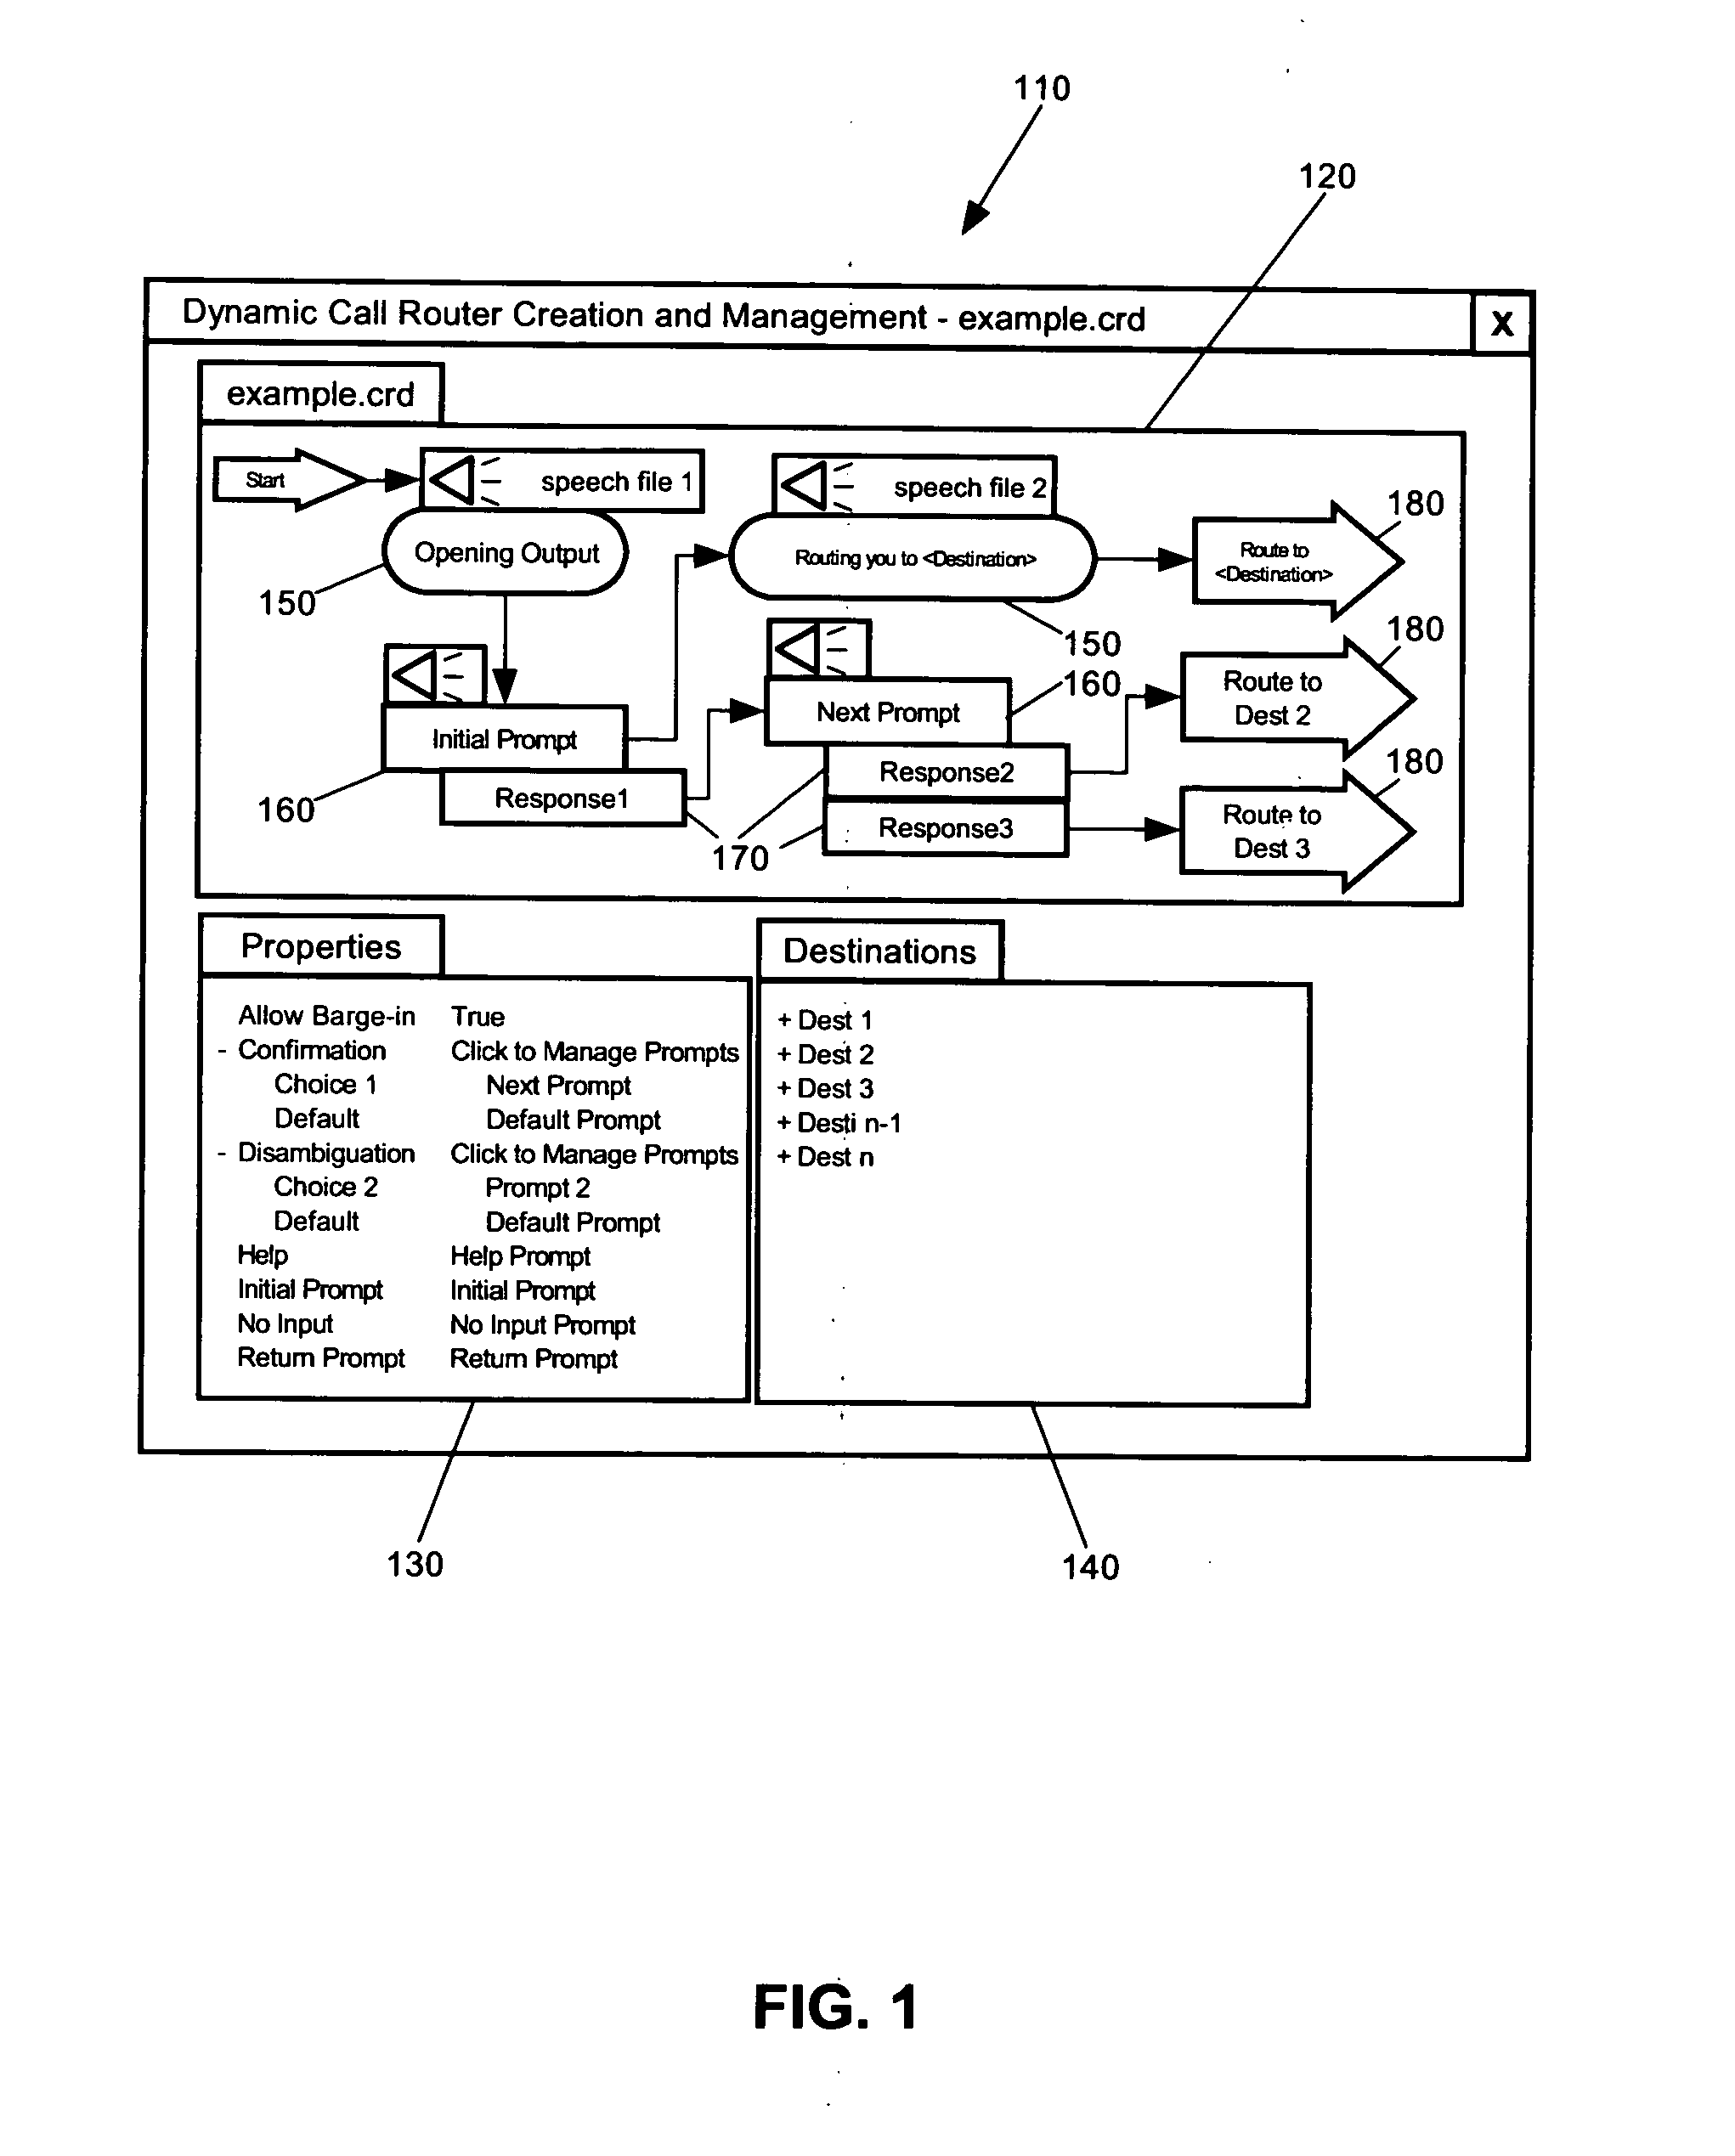 Graphical tool for creating a call routing application